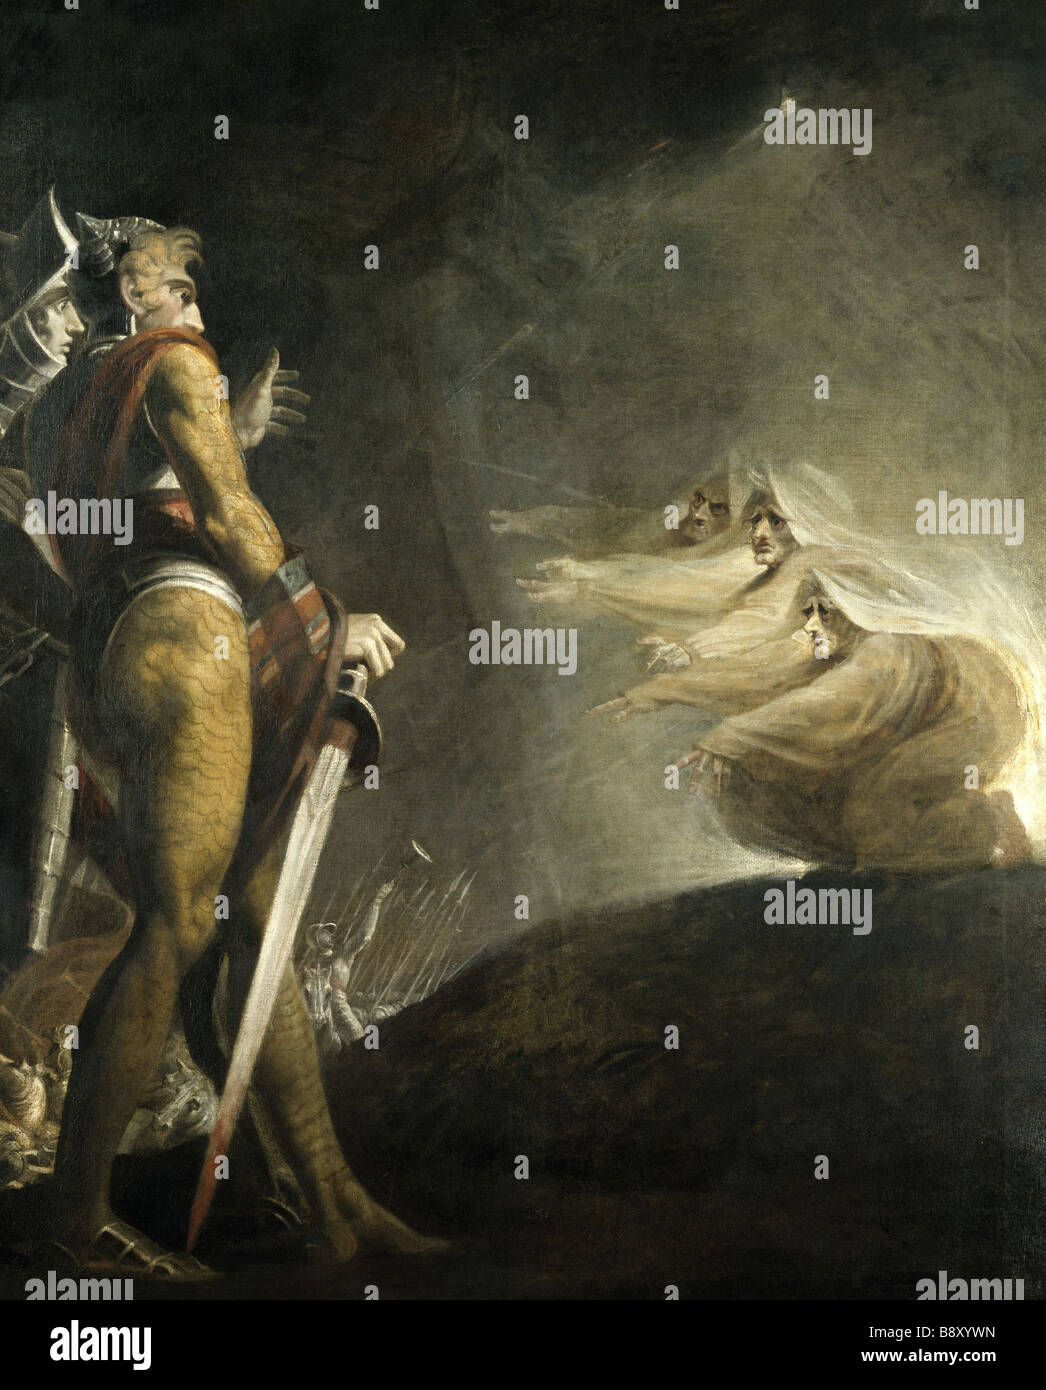 MACBETH AND THE WITCHES - 'MACBETH', ACT I, SCENE iii by Henry Fuseli (1741-1825) from the North Gallery at Petworth. (Dec 1992) Stock Photo